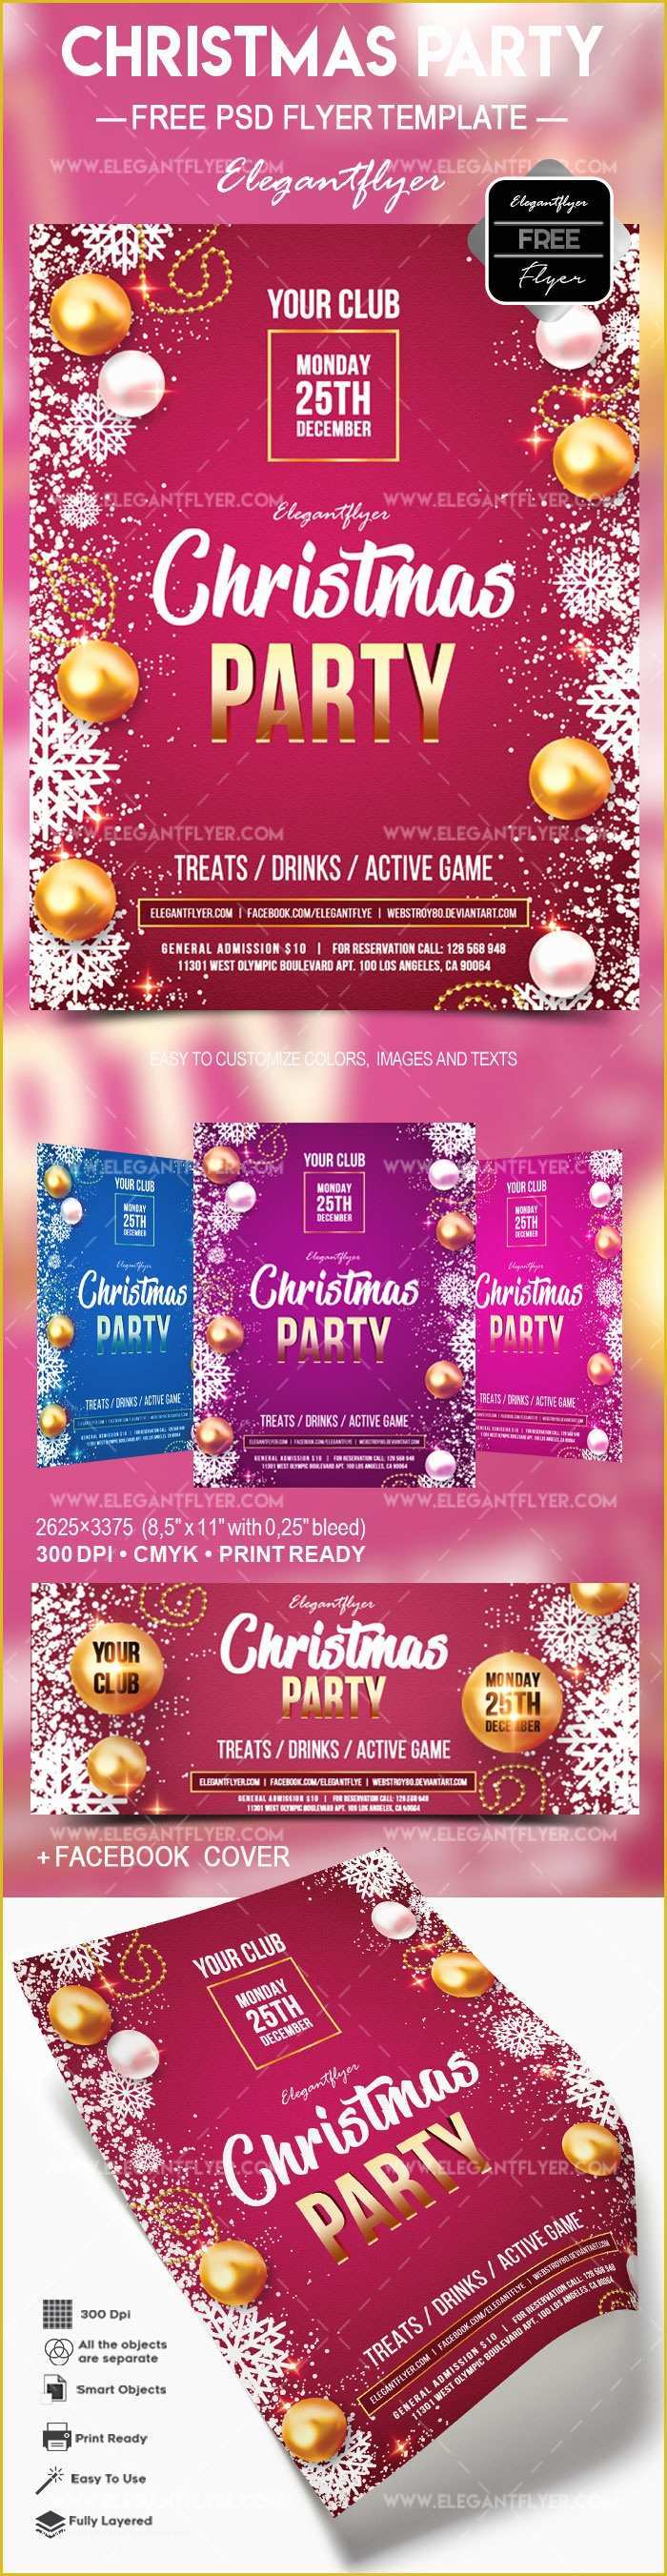 Free Christmas Flyer Templates Of Free Christmas Party – Flyer Psd Template – by Elegantflyer